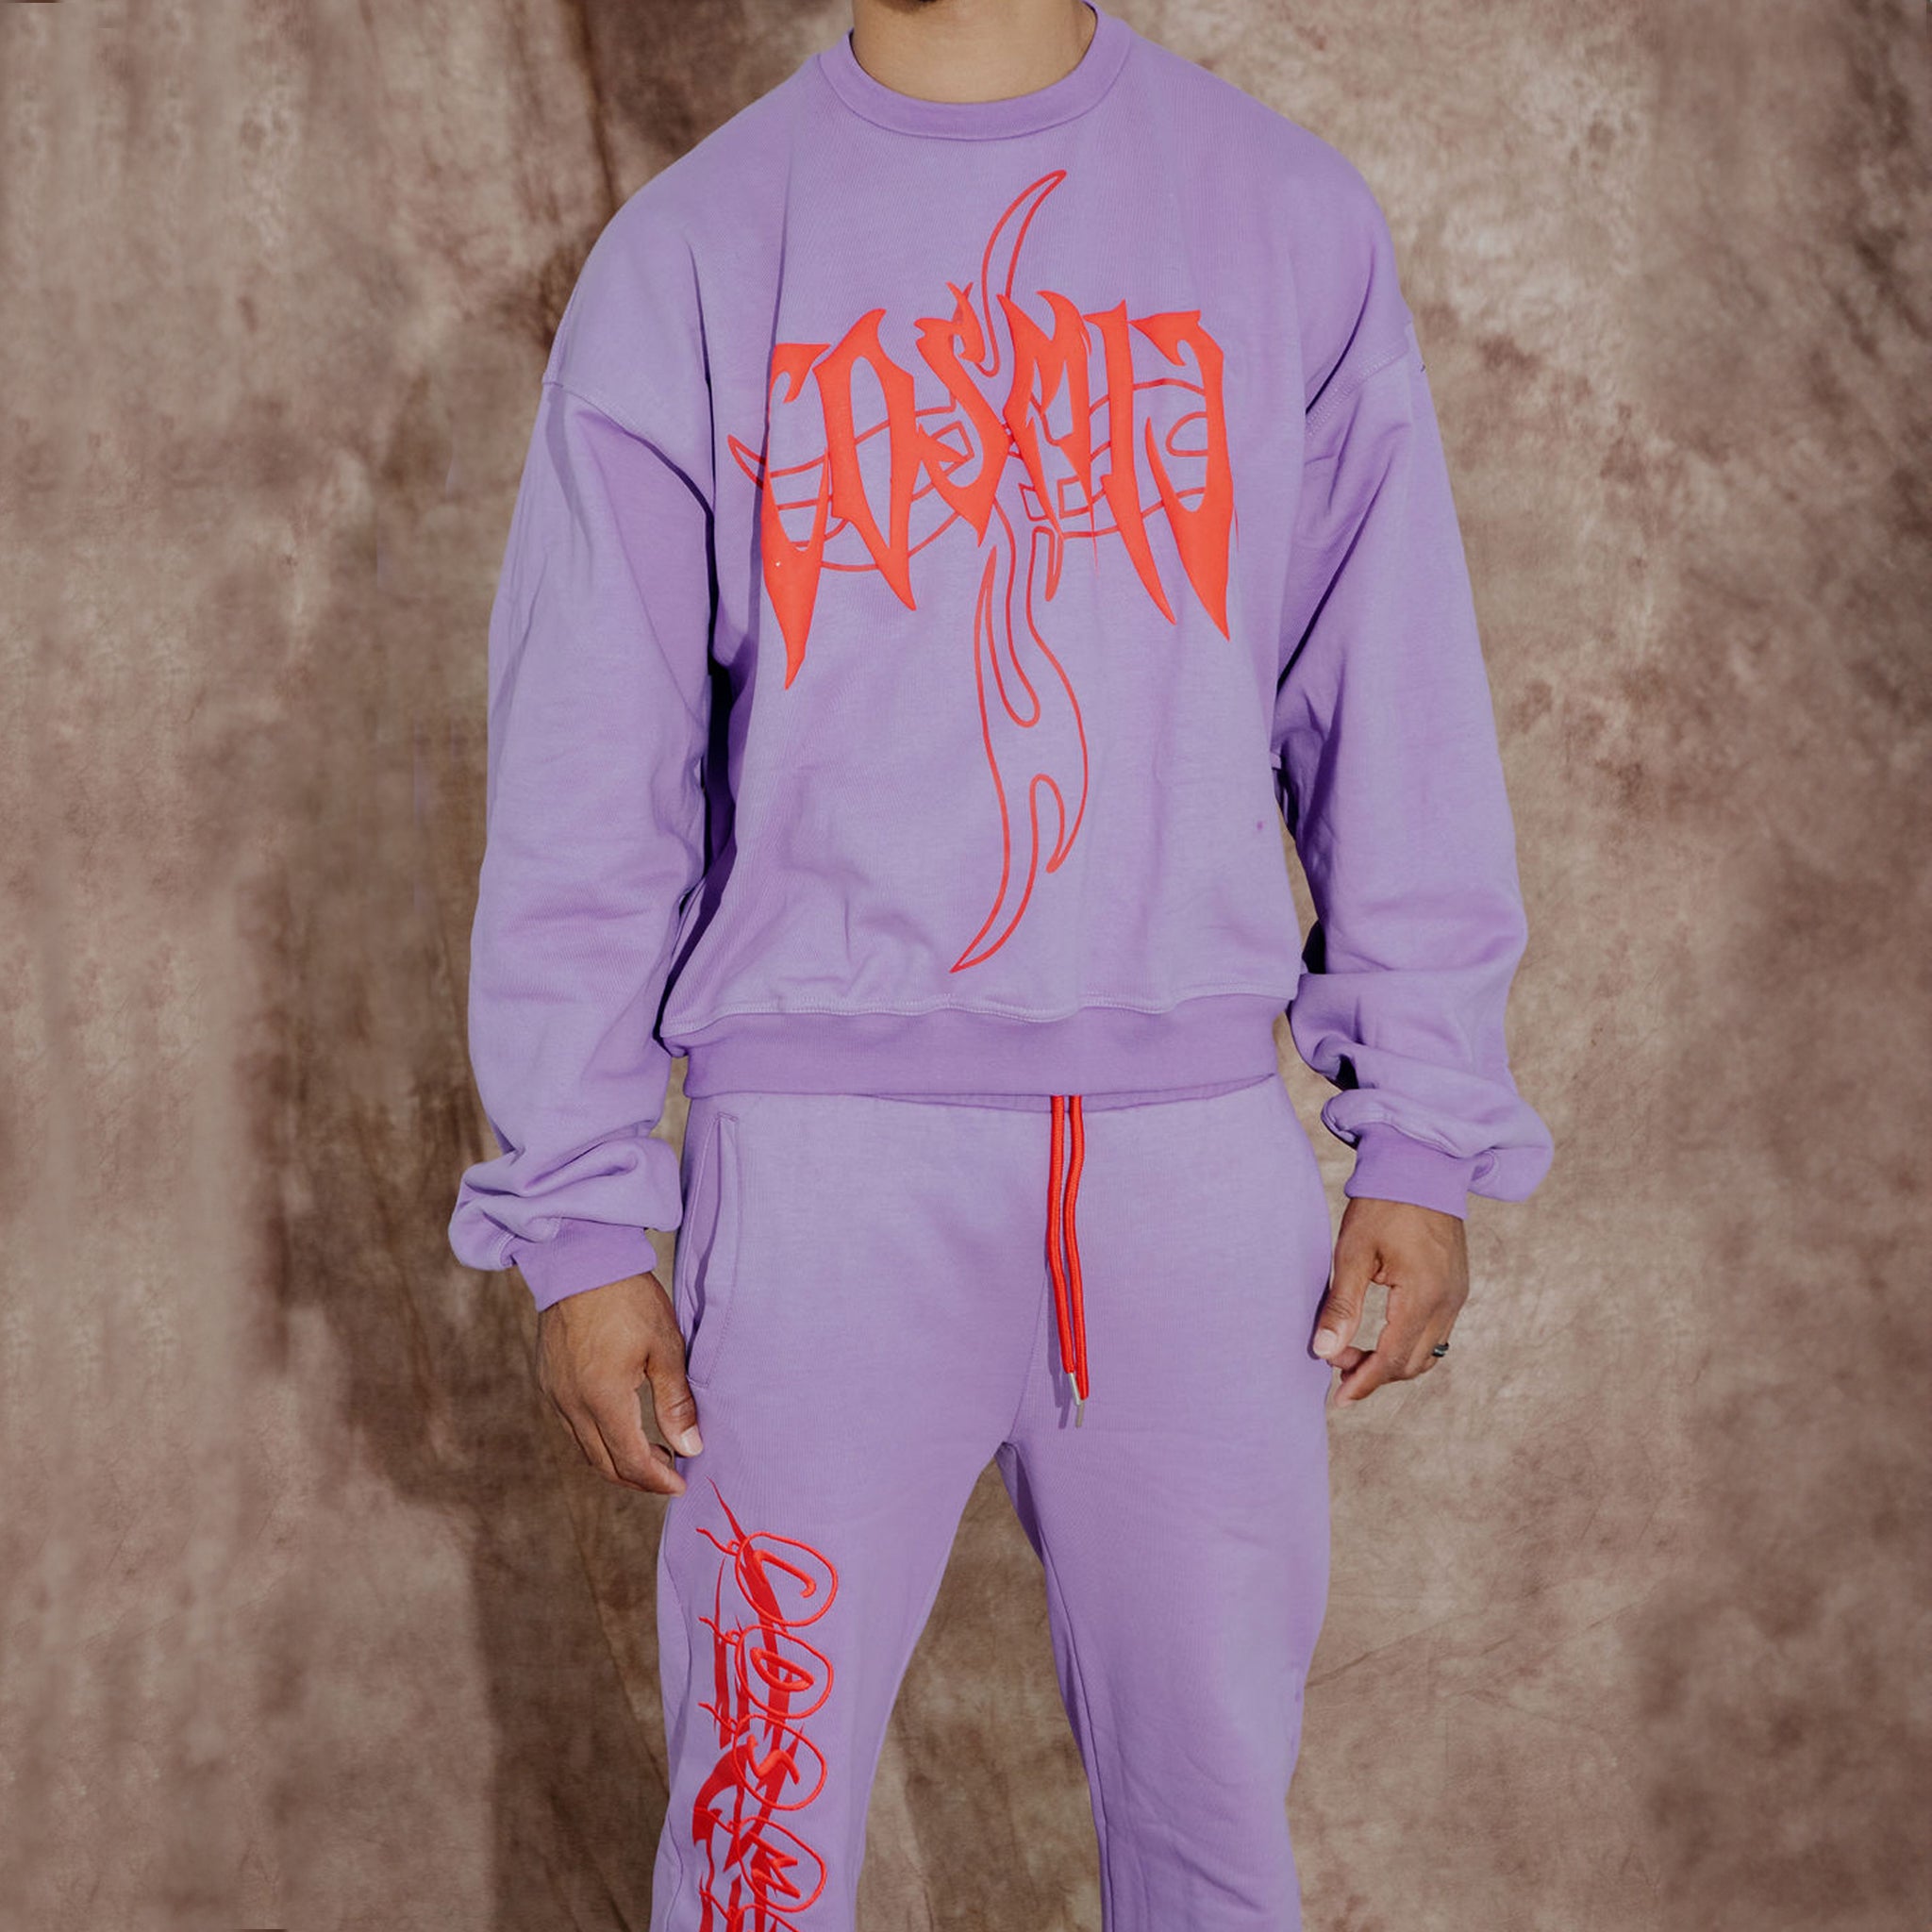 Cosmic the Oasis offers the Ube Collection, starting with this crew neck 100% cotton heavyweight sweatshirt, with decorative Cosmic logo.  Forms a sweatsuit set with the Aspen Heavyweight Sweatpants (sold separately).